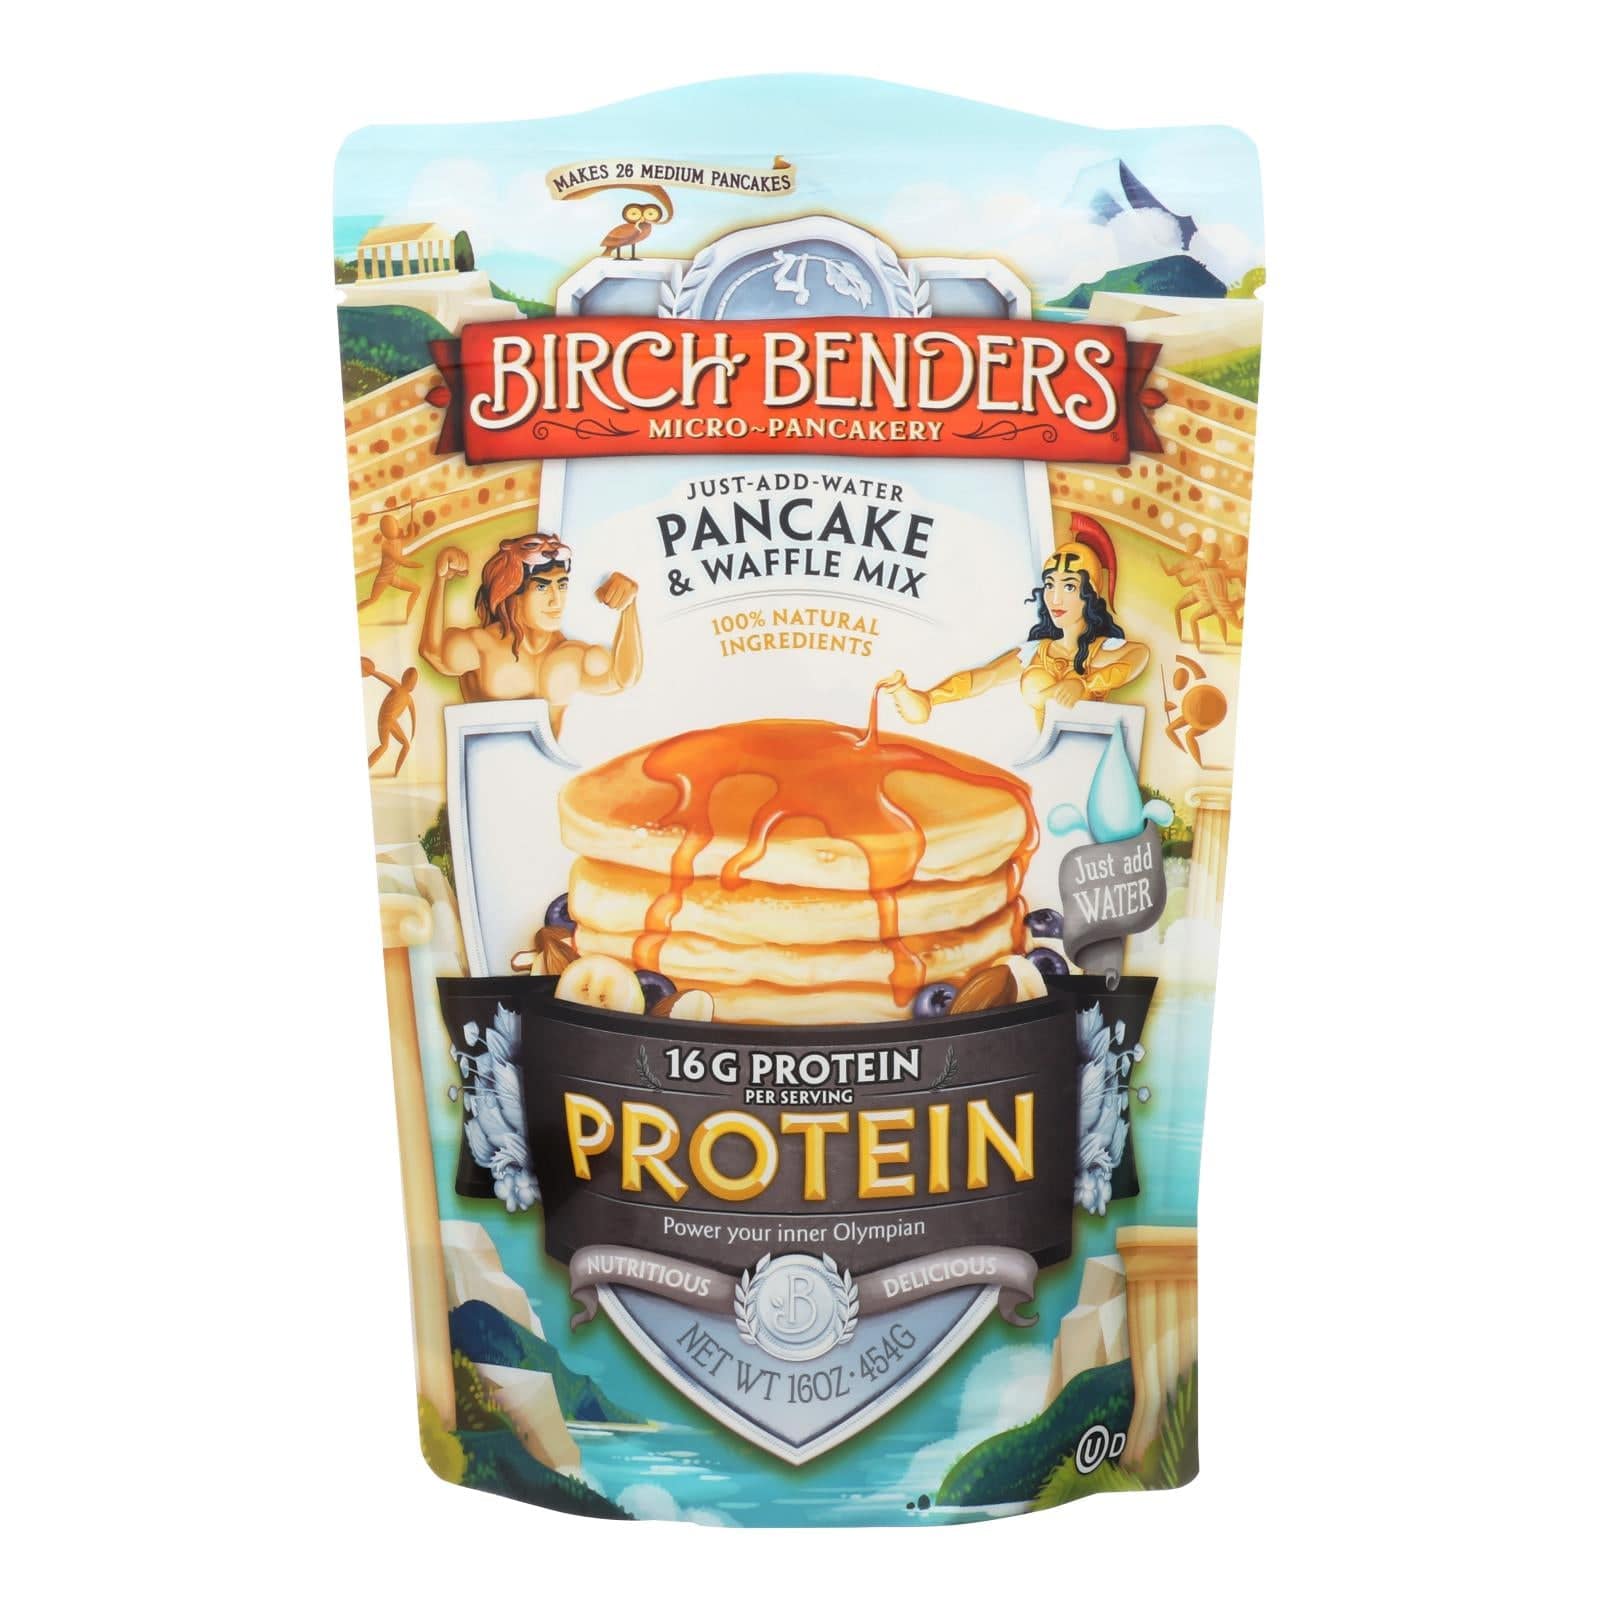 Birch Benders - Pancake And Waffle Mix - Protein - Case Of 6 - 16 Oz | OnlyNaturals.us